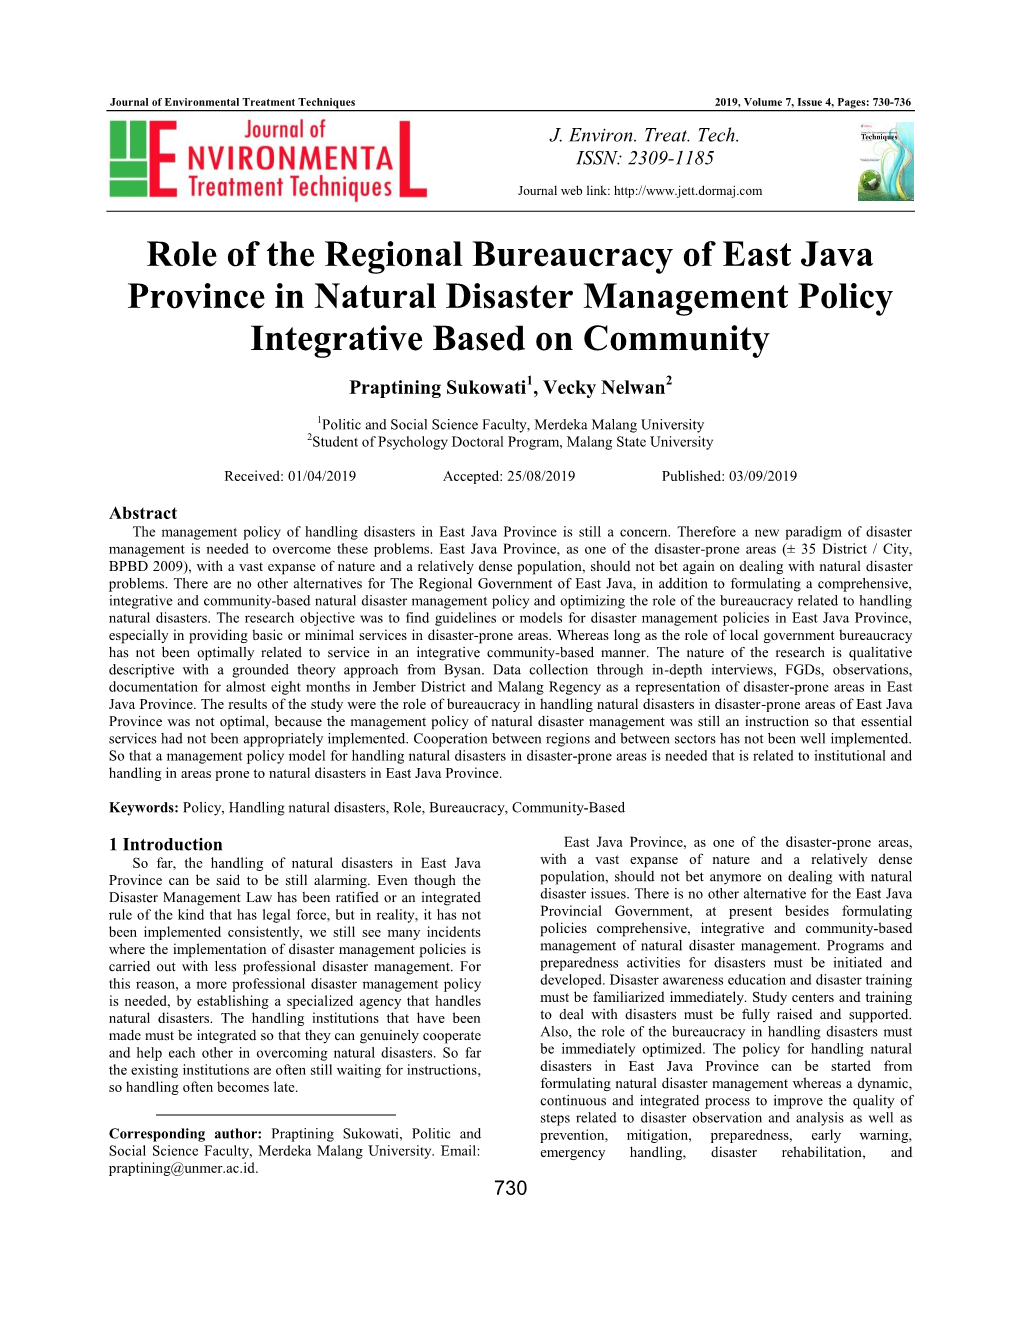 Role of the Regional Bureaucracy of East Java Province in Natural Disaster Management Policy Integrative Based on Community